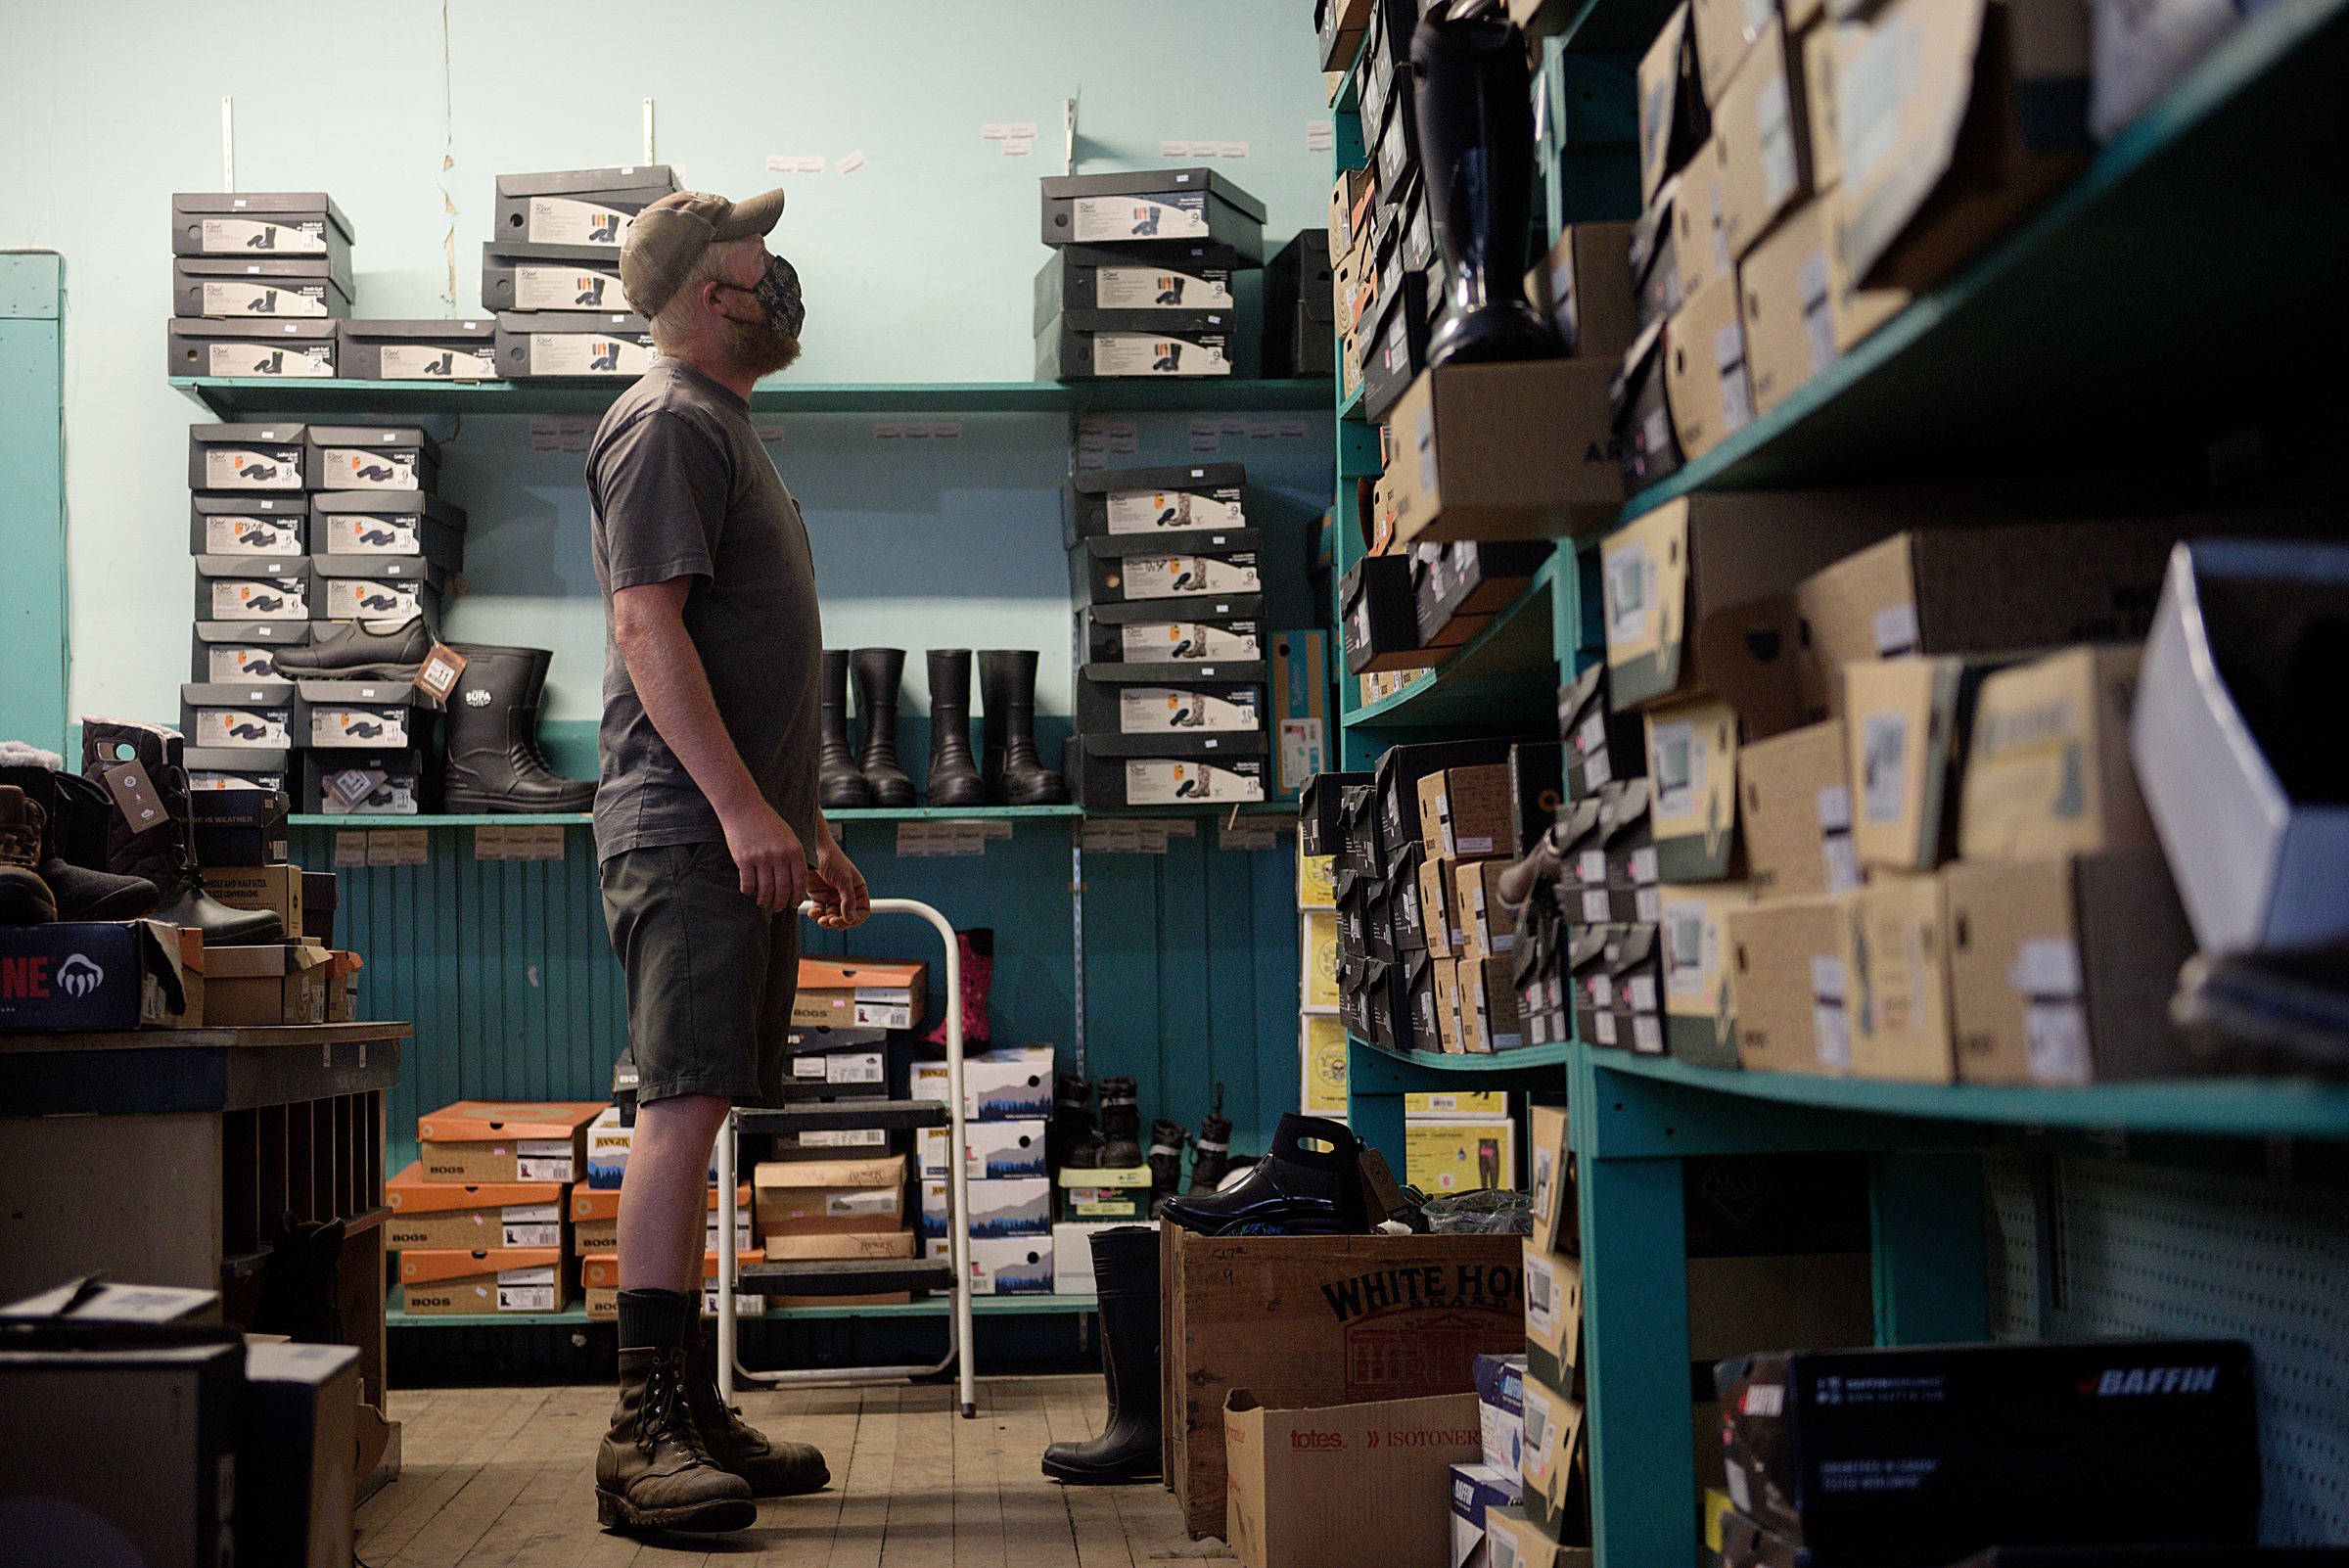 After blowing out his work boot the night before, Josh Swift, of Norwich, was waiting in his truck for Dan and Whit’s in Norwich, Vt., to open Thursday, July 10, 2020 so he could look for a replacement pair. (Valley News - James M. Patterson) Copyright Valley News. May not be reprinted or used online without permission. Send requests to permission@vnews.com.